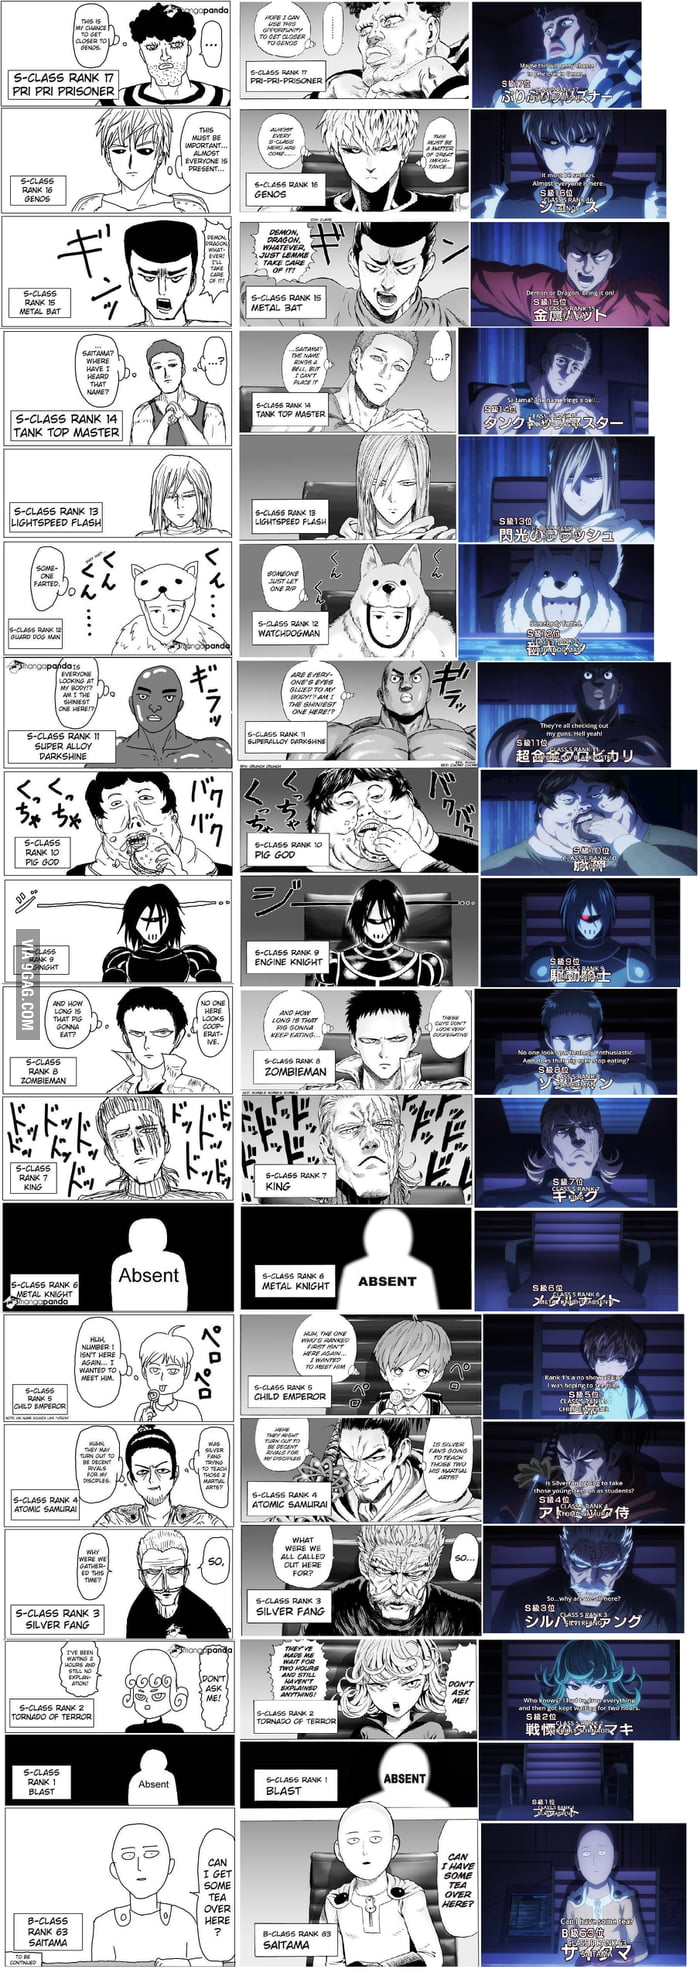 Original Redraw And Anime Comparison One Punch Man 9gag